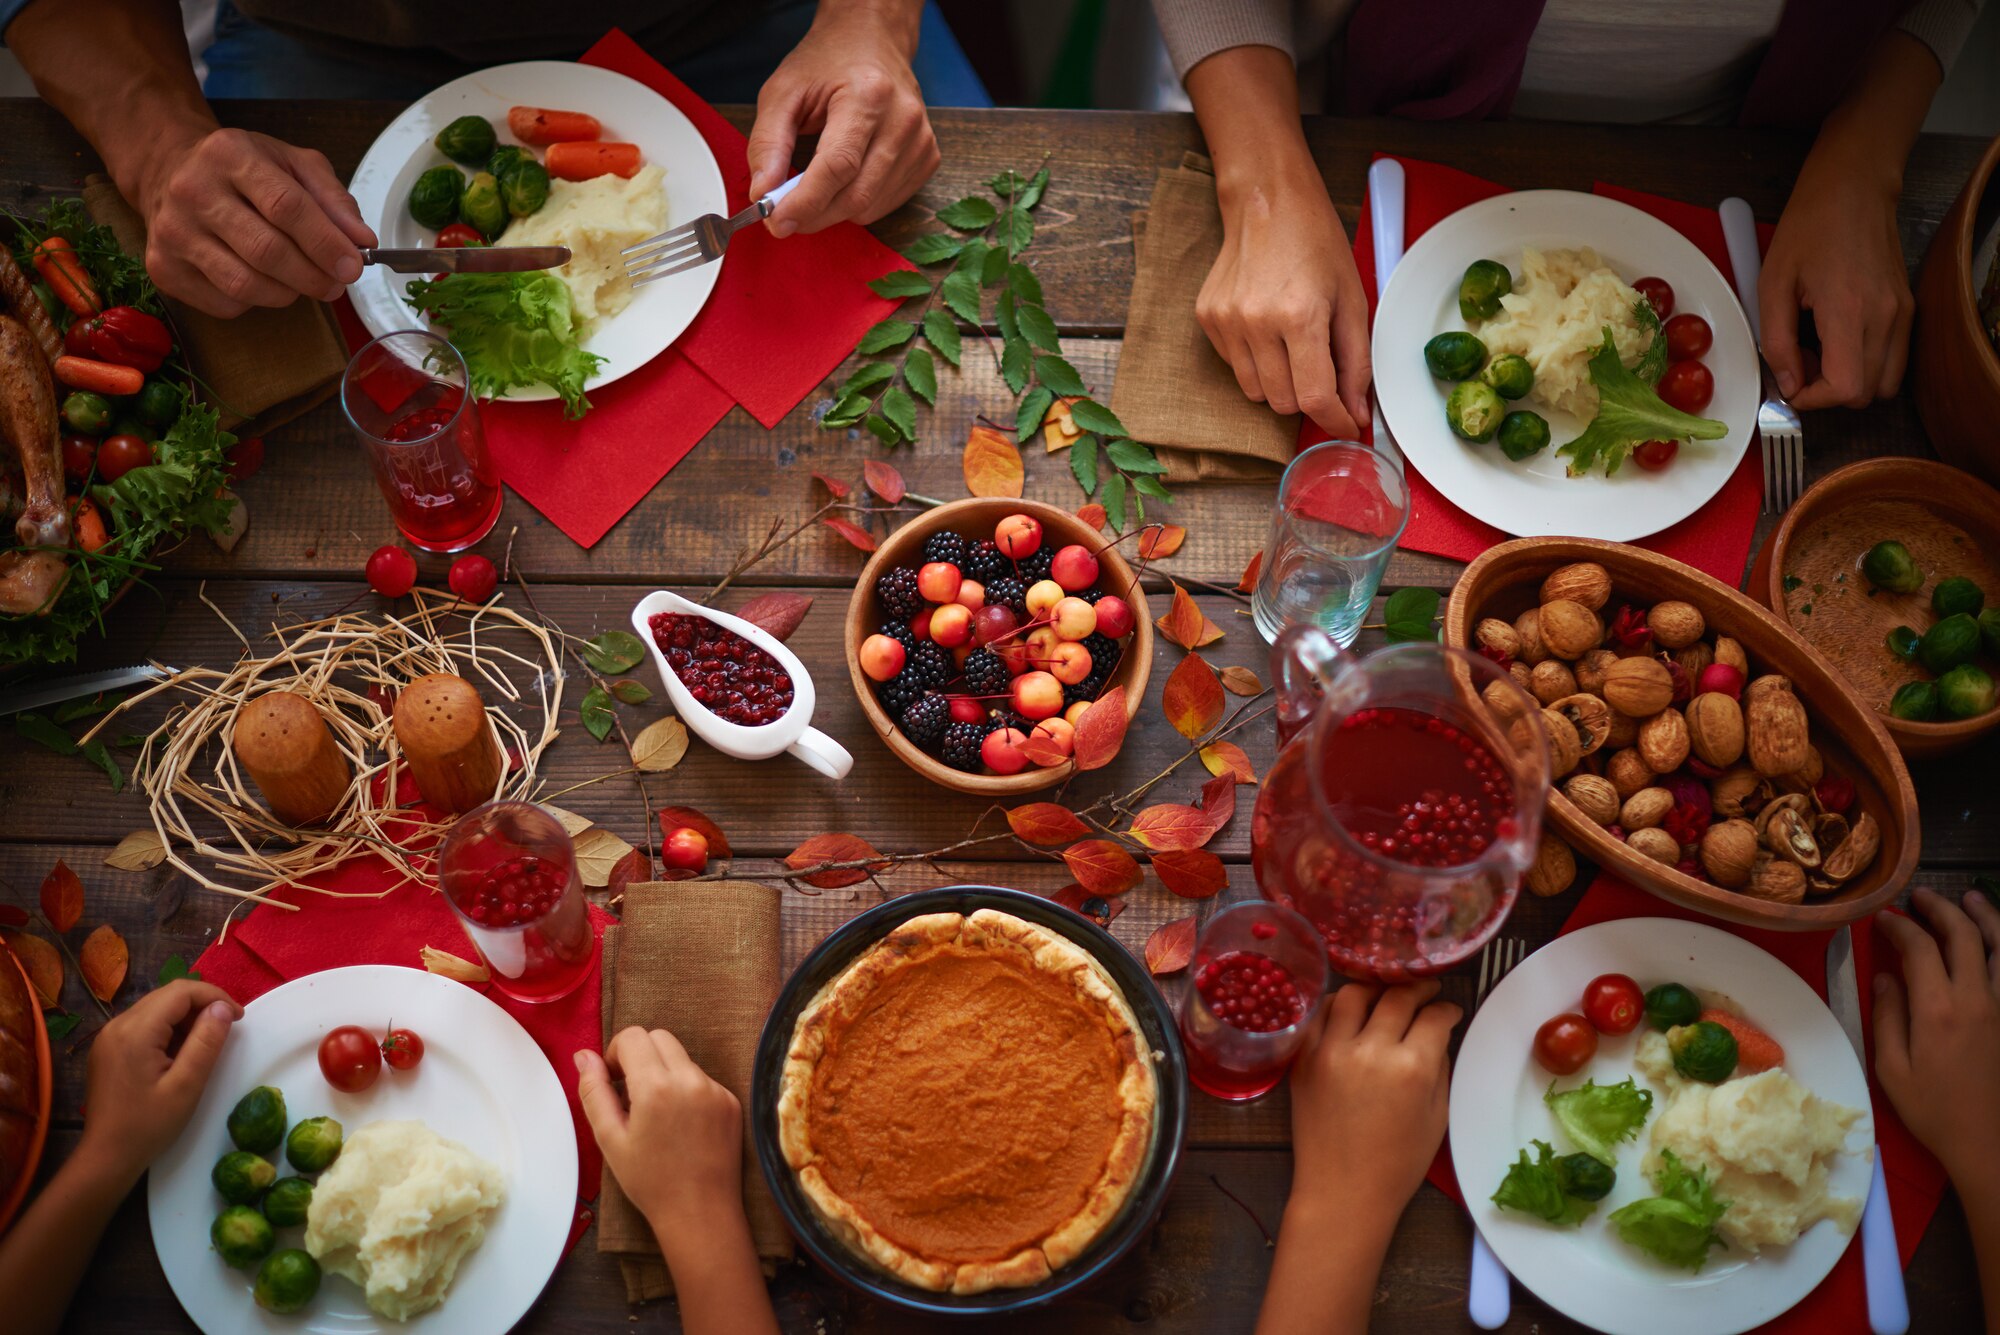 Friendsgiving is a way to keep the Thanksgiving celebration alive even when away from family. Each year, many service members find themselves away from home, but they can still celebrate the holiday with an evening of food, friends, and fun. (Courtesy photo)